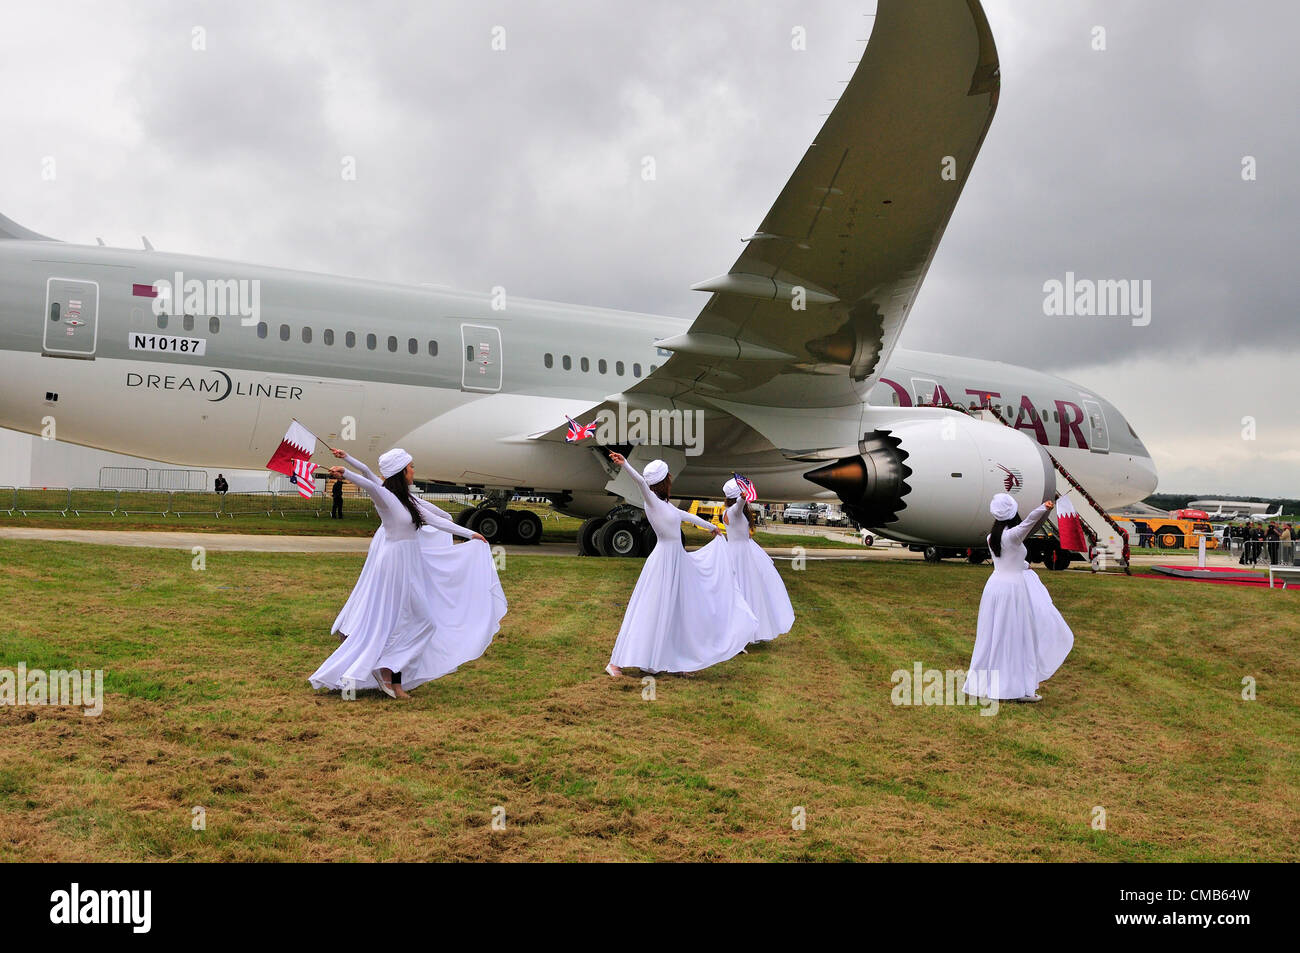 Farnborough, UK. Monday 9th July 2012.  Qatar Airways dancers dance around the US Plane maker Boeing 787  jet ‘Dreamliner’ at the Farnborough International Airshow 2012 which started today. It is seen as a rival to European Airbus at the Farnborough air show. Qatar Airways participated for the first time in flying displays at the Farnborough International Airshow. Stock Photo